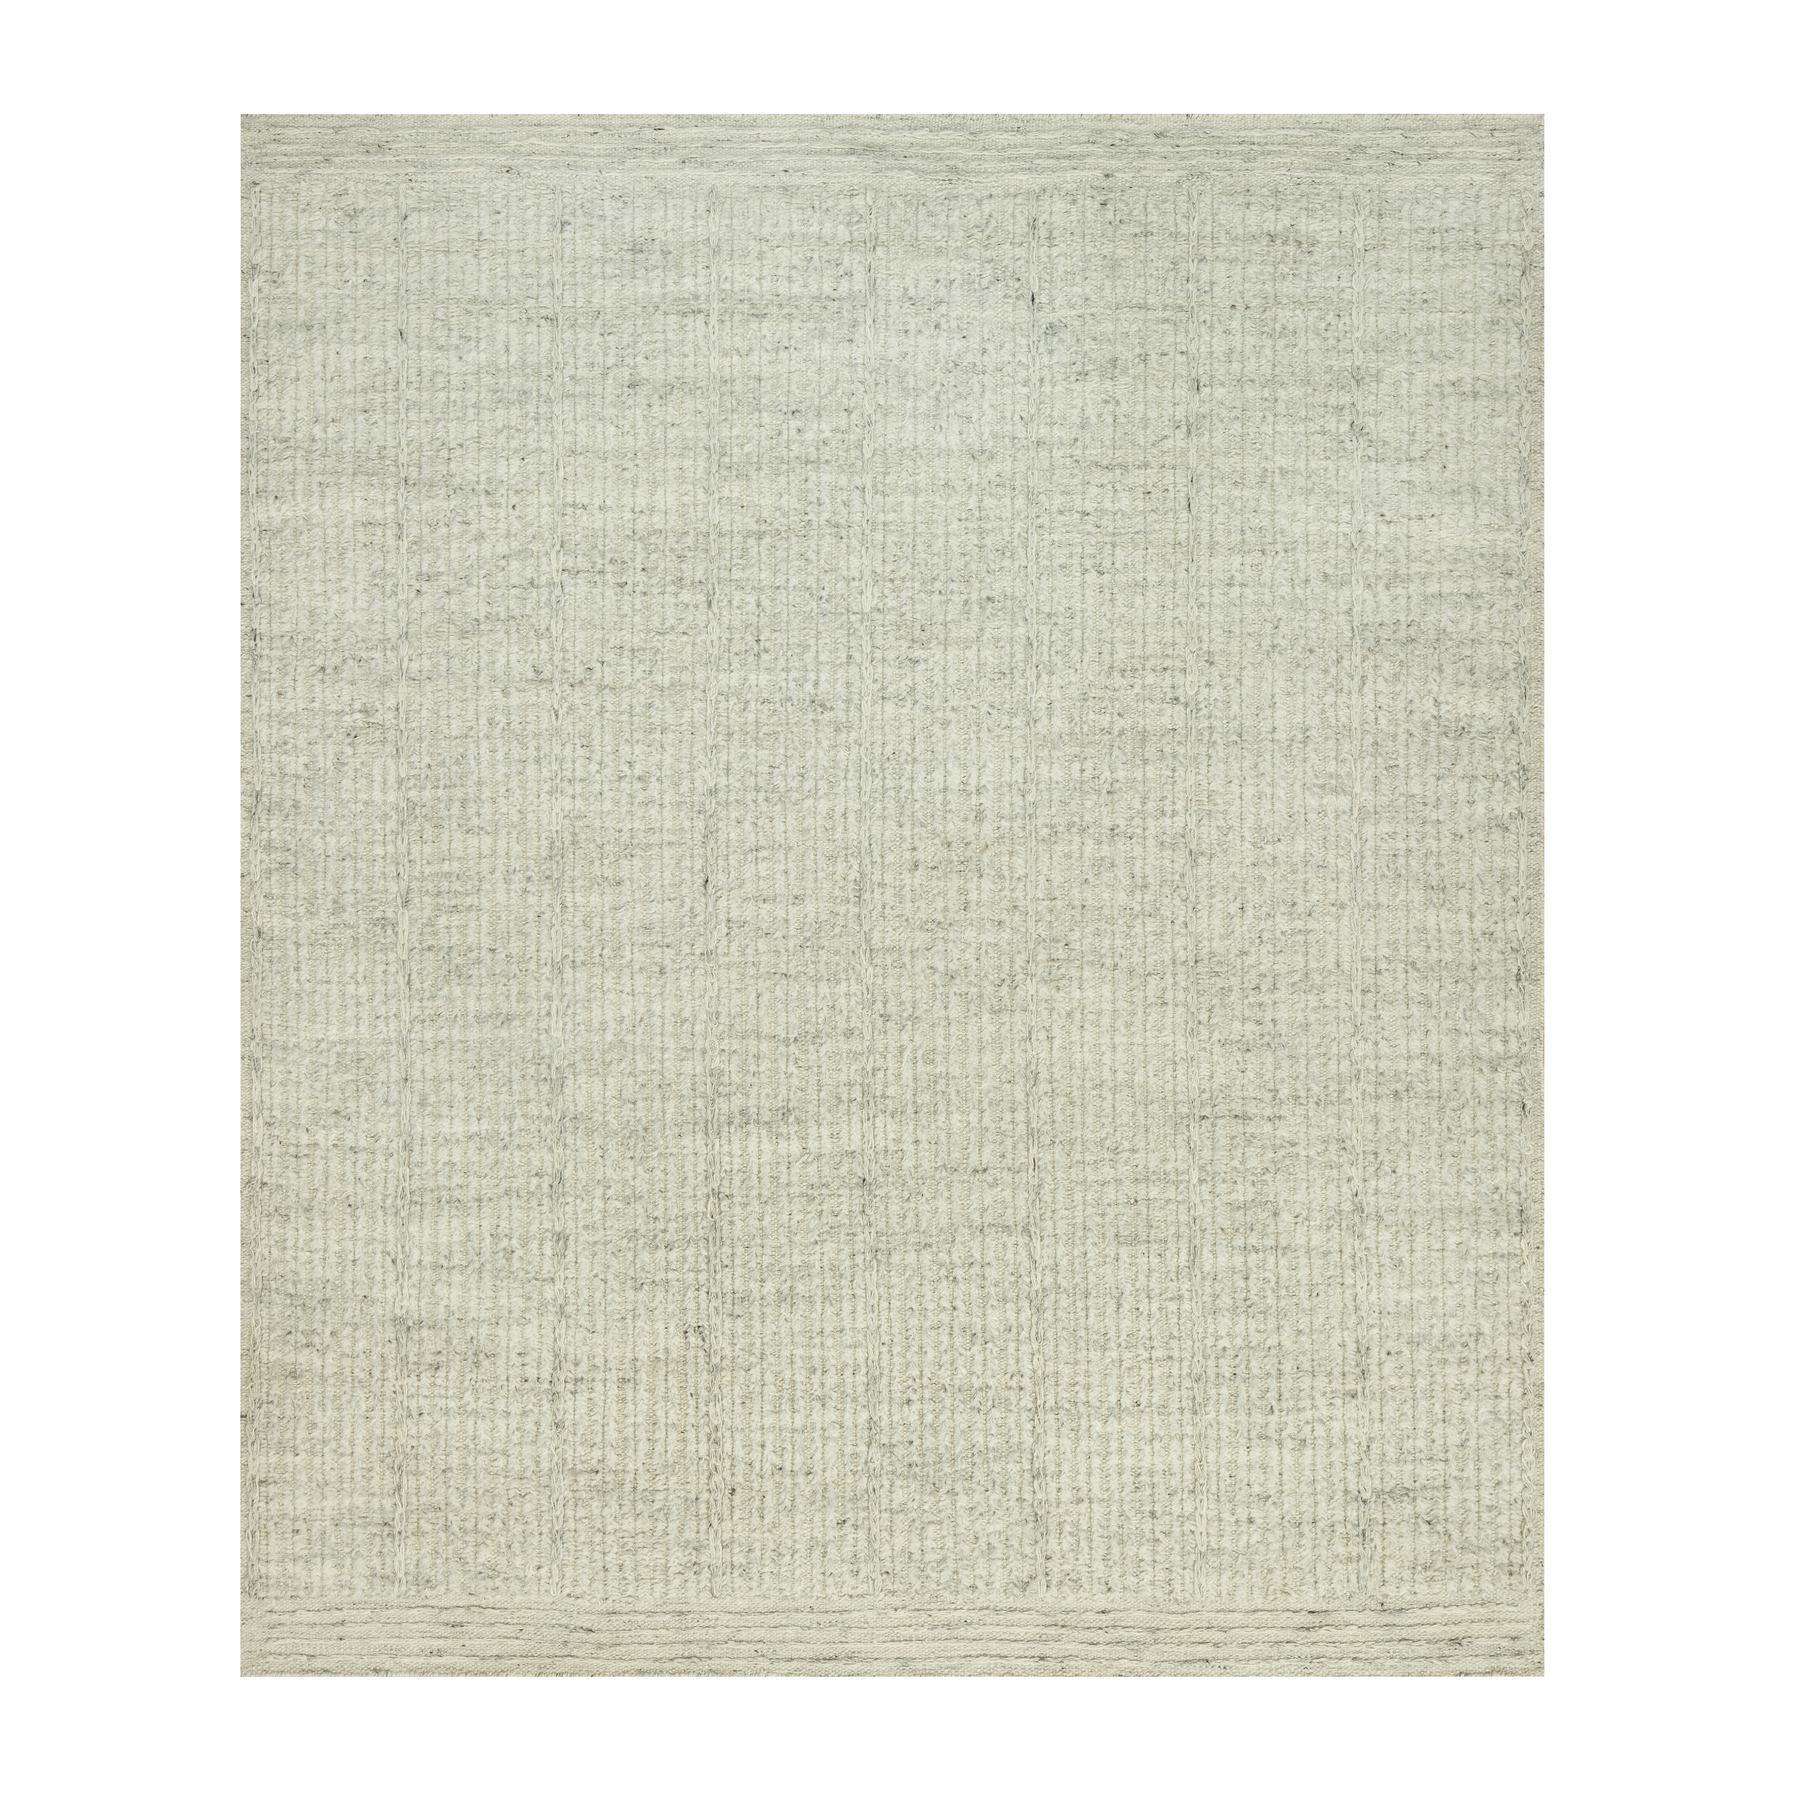 traditional Wool Hand-Woven Area Rug 8'2